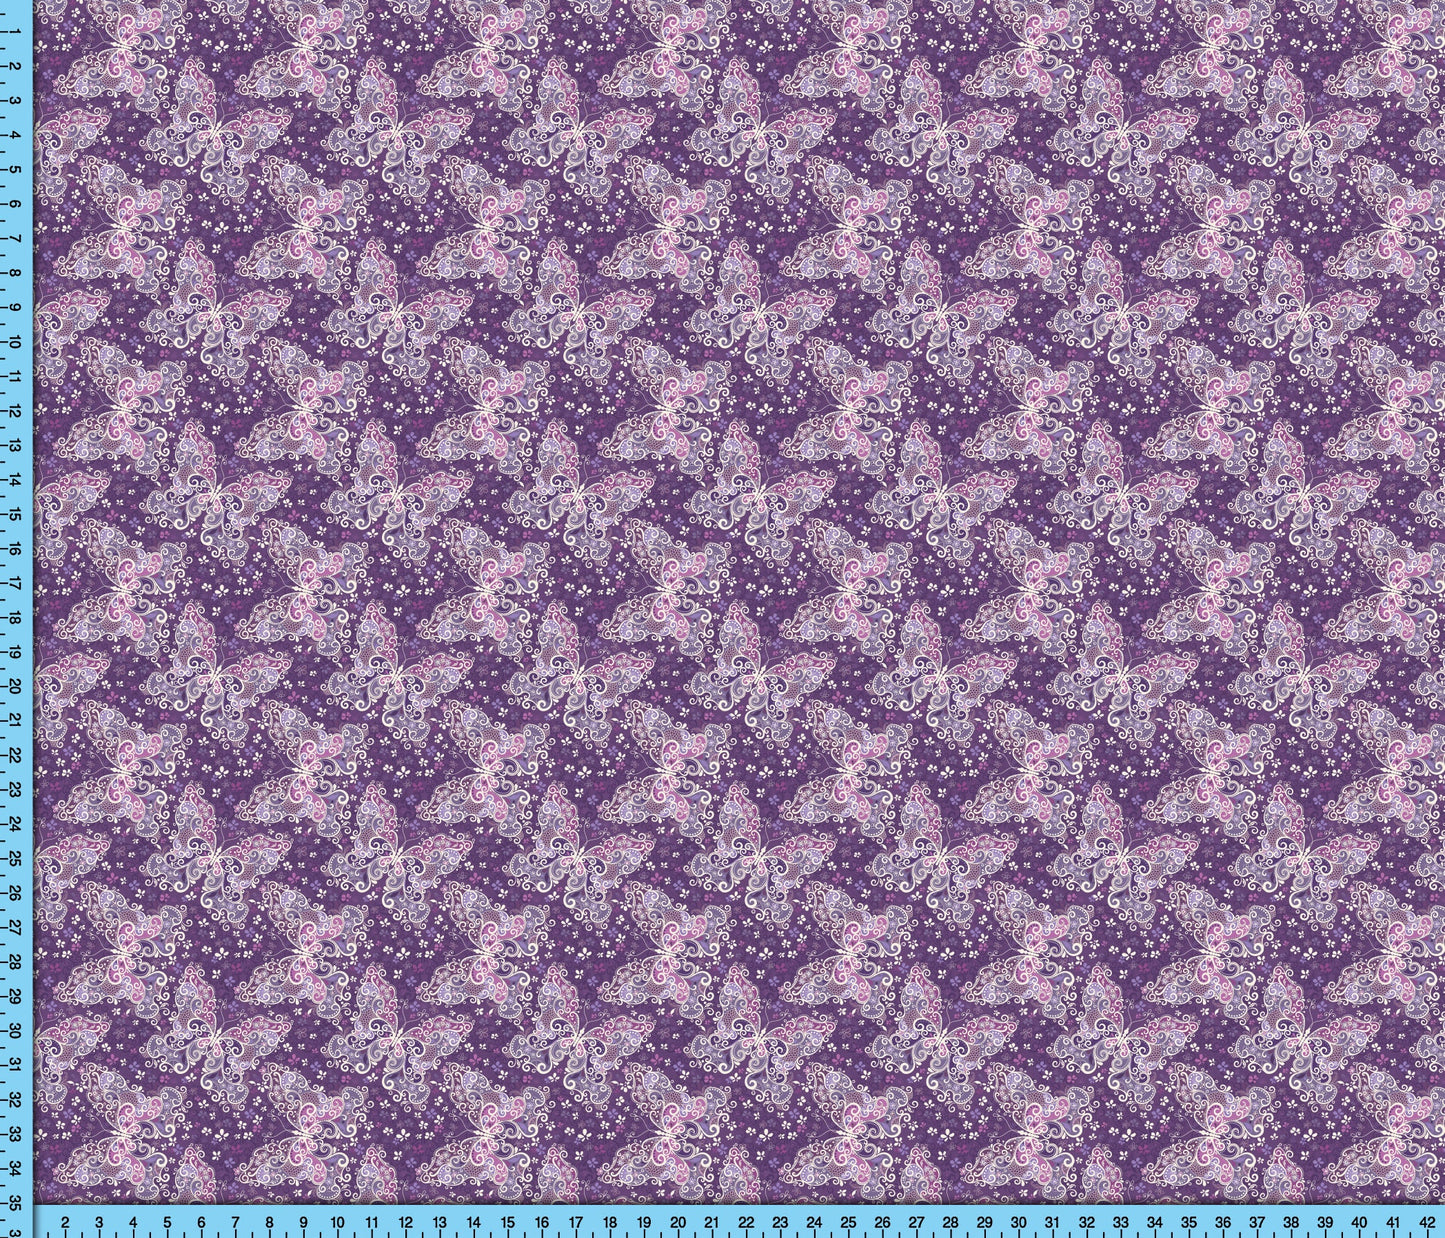 Purple Butterfly Fabric Cottagecore Design for Crafts, Upholstery, Clothing